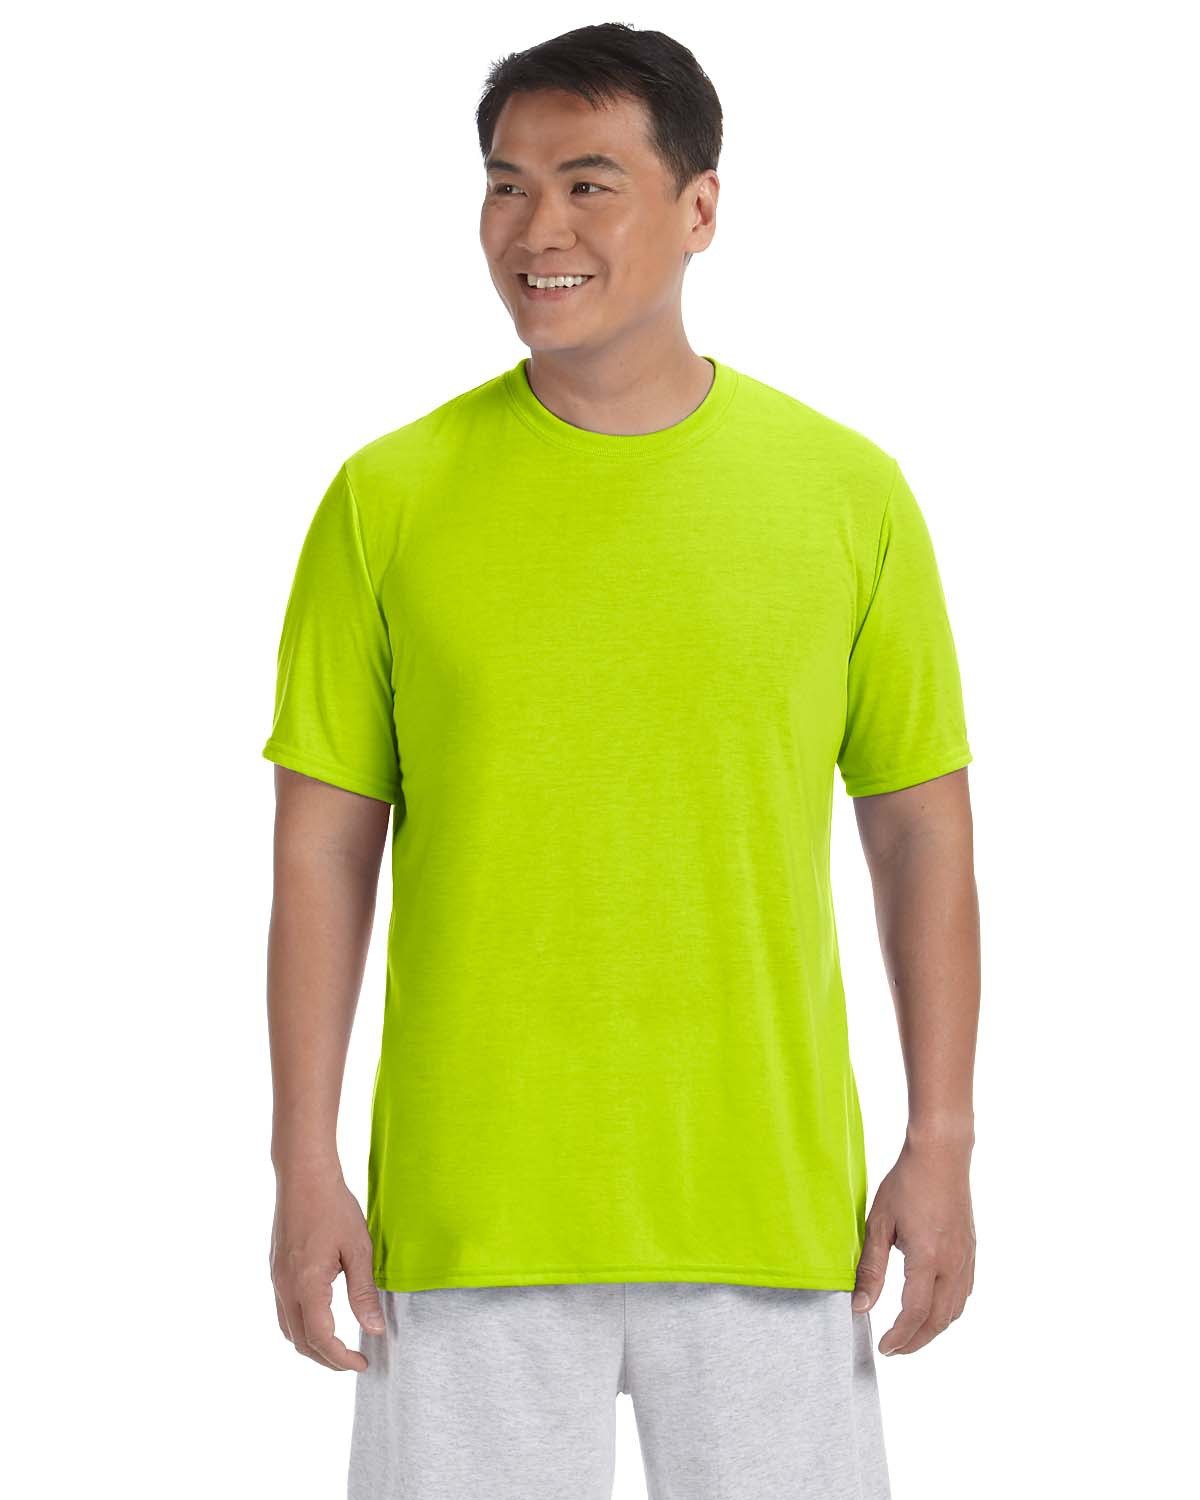 Safety green performance t-shirt